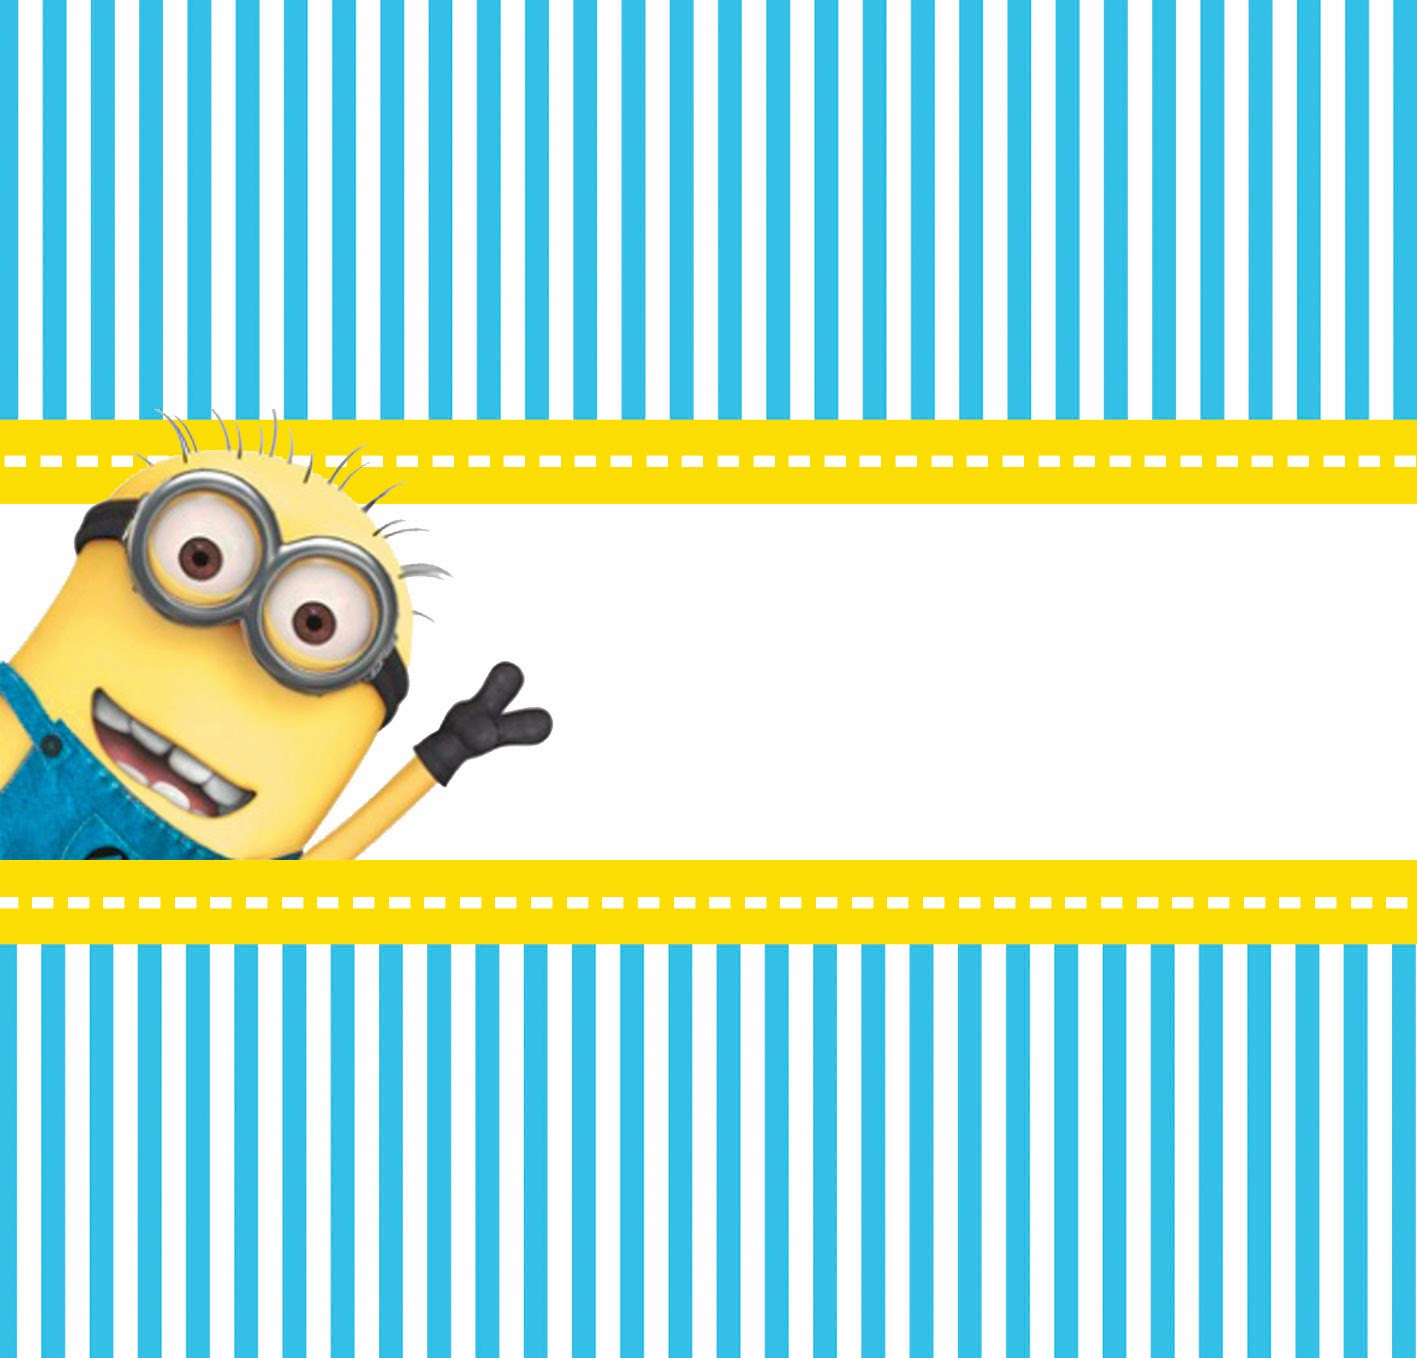 Despicable Me Free Printable Candy Bar Labels. - Oh My Fiesta! In throughout Free Printable Minion Food Labels